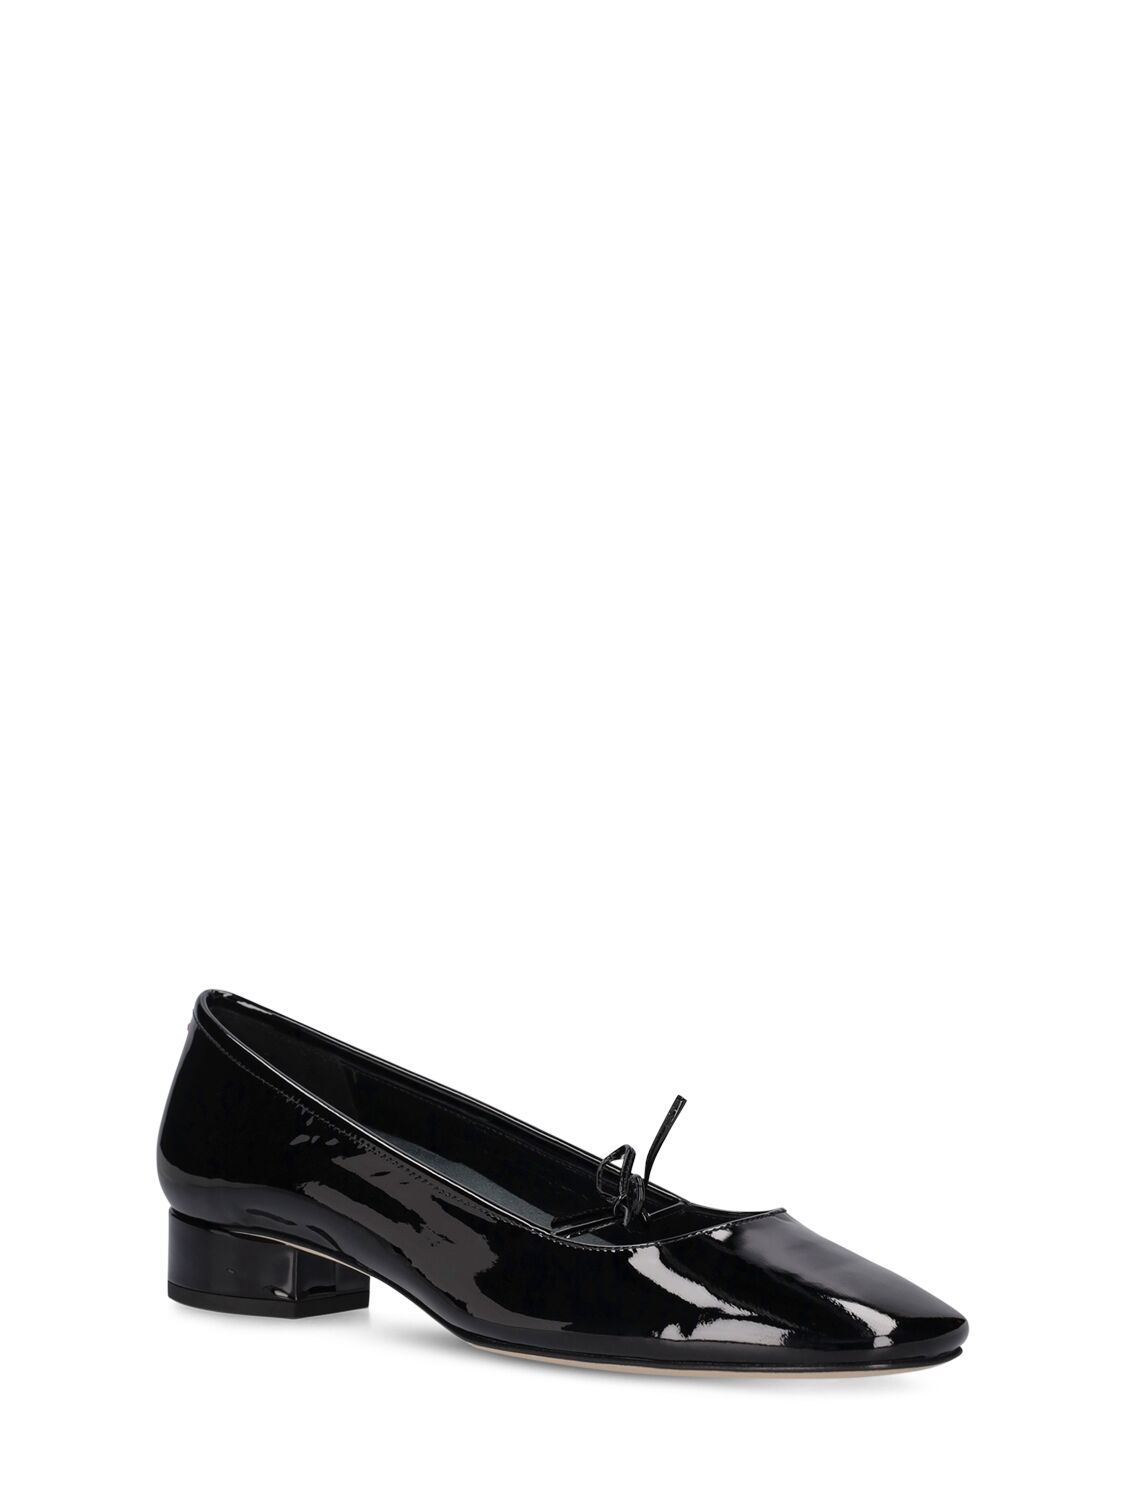 Shop Aeyde 25mm Darya Leather Ballerina Shoes In Black